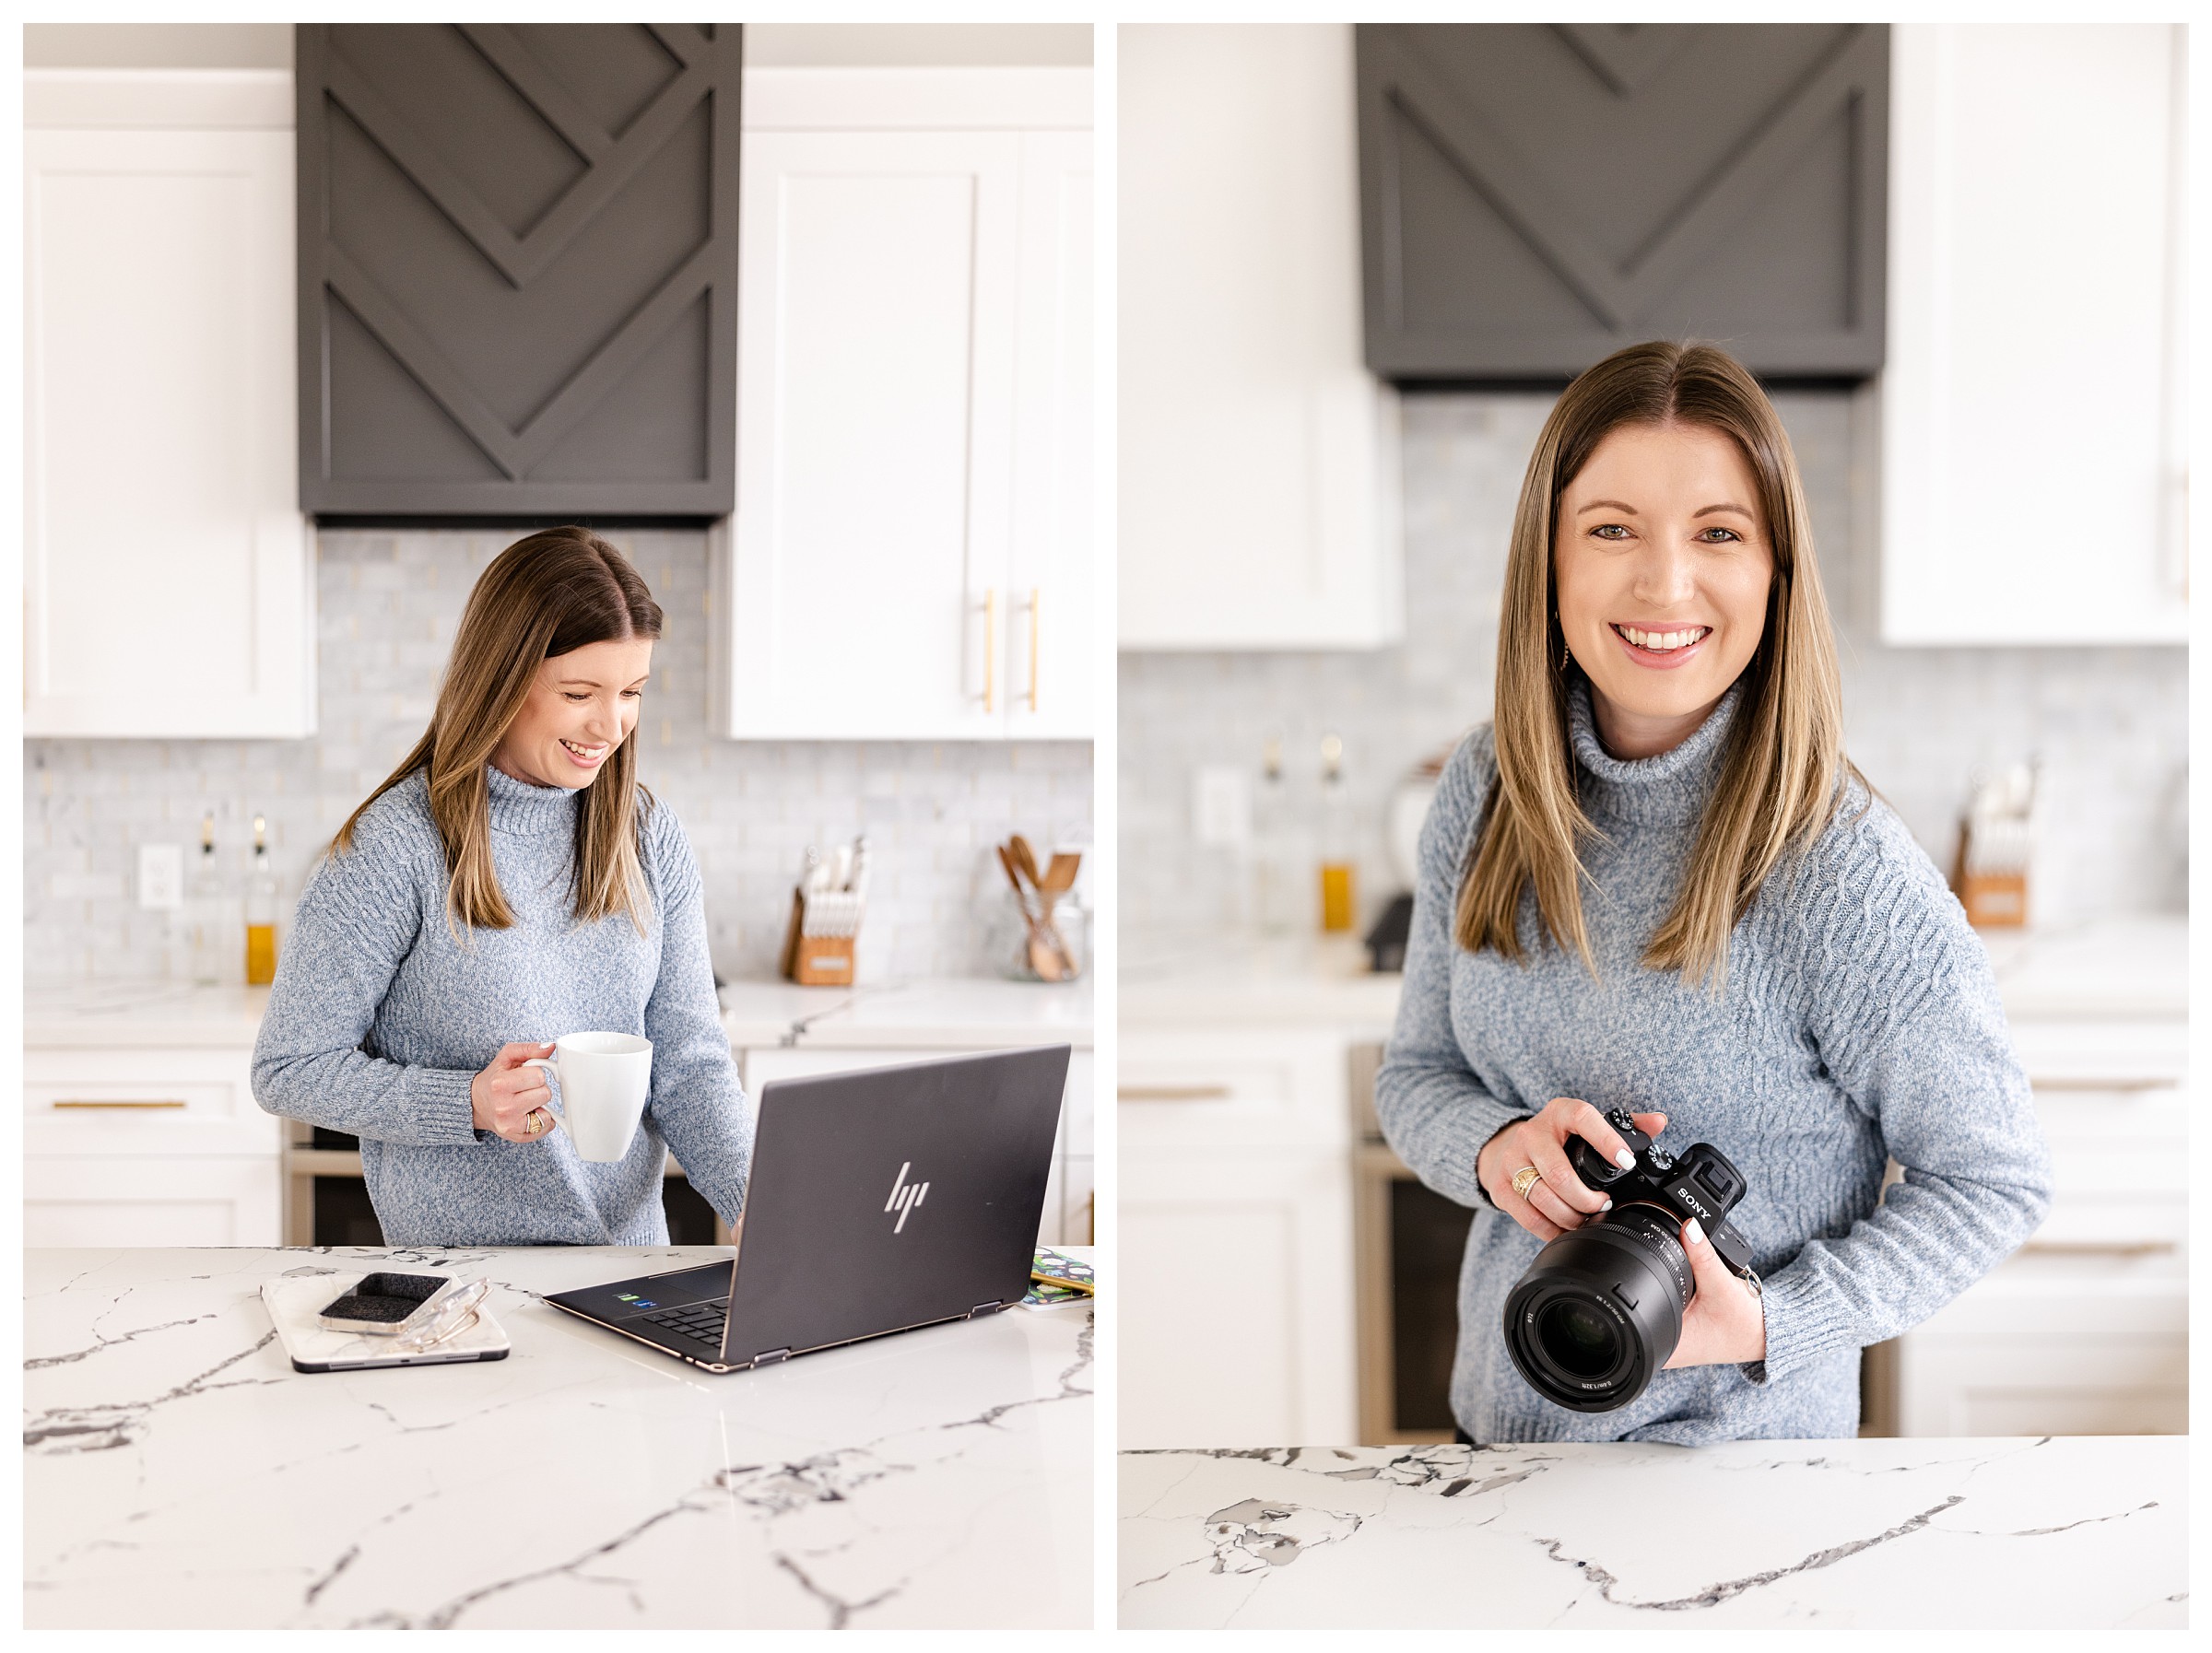 First image is of woman in blue sweater holding a cup of coffee and typing on her laptop while smiling in an all white kitchen at 201Lofthaus, a Houston studio. Second image is of woman with blue sweater standing in kitchen holding camera at her waist and smiling